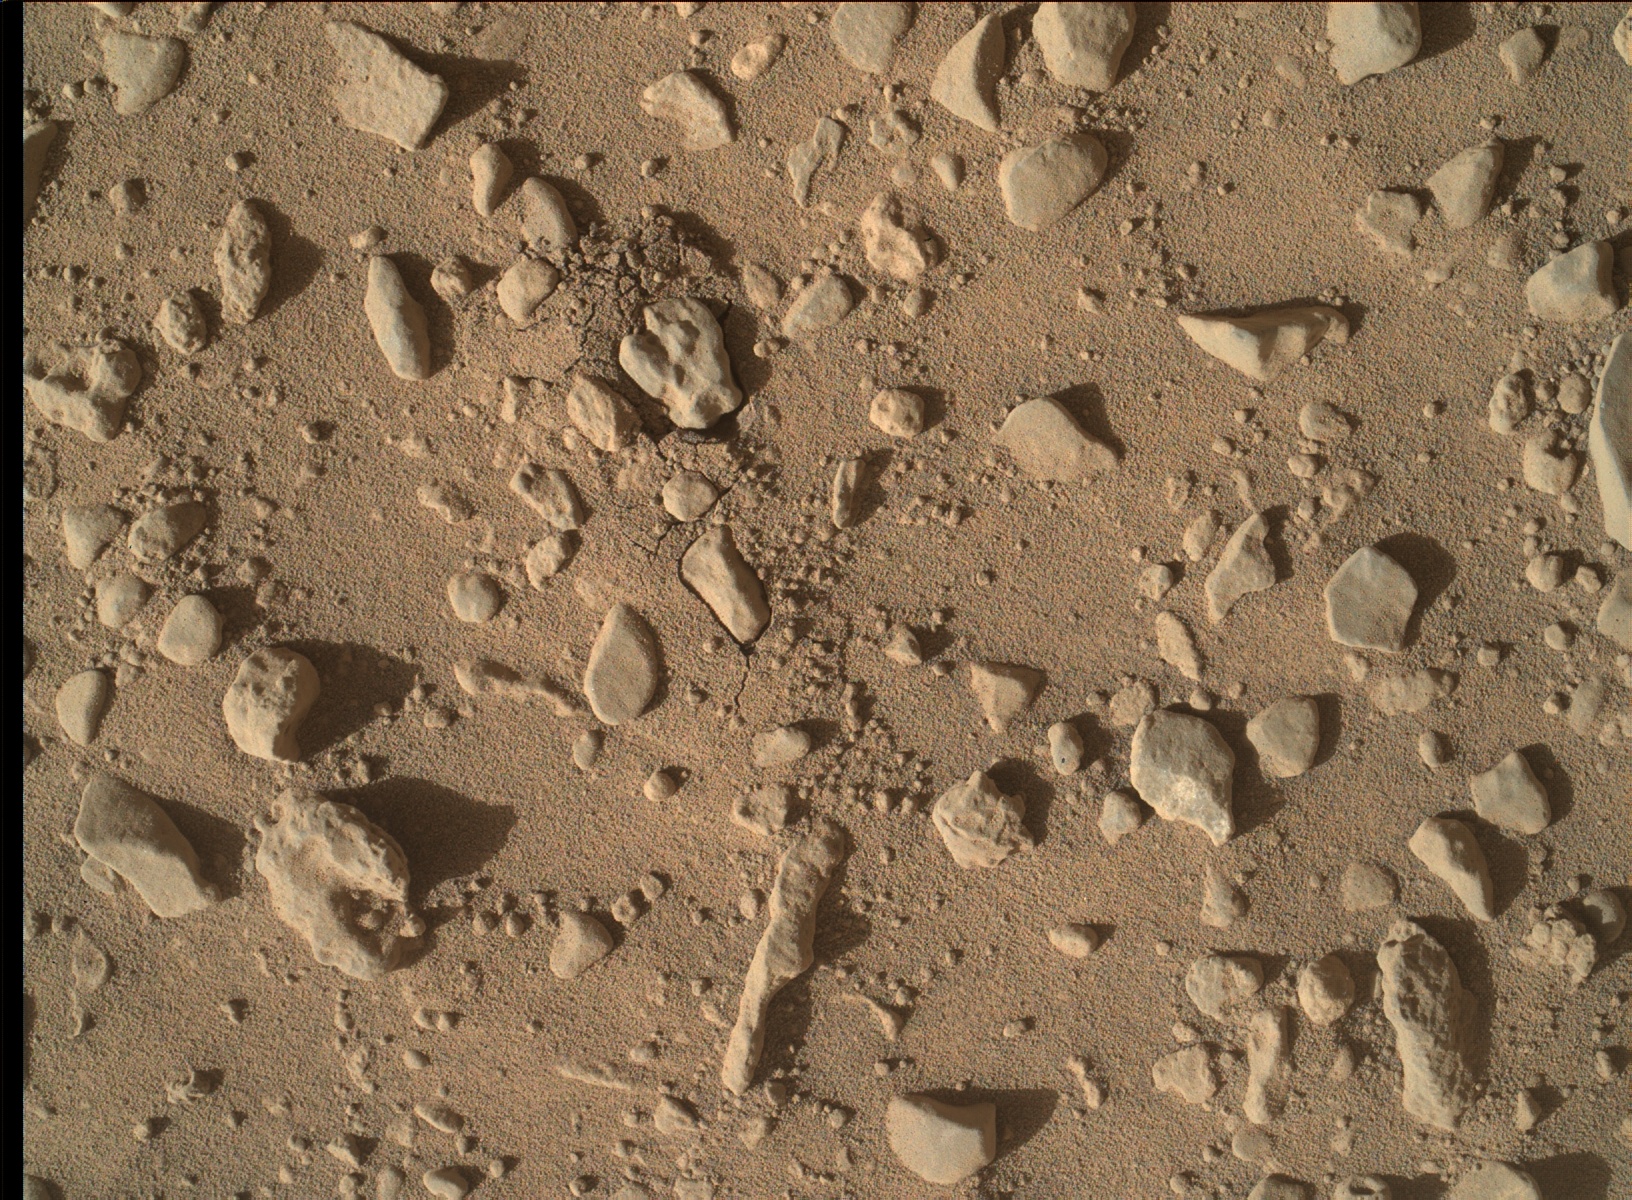 Nasa's Mars rover Curiosity acquired this image using its Mars Hand Lens Imager (MAHLI) on Sol 523